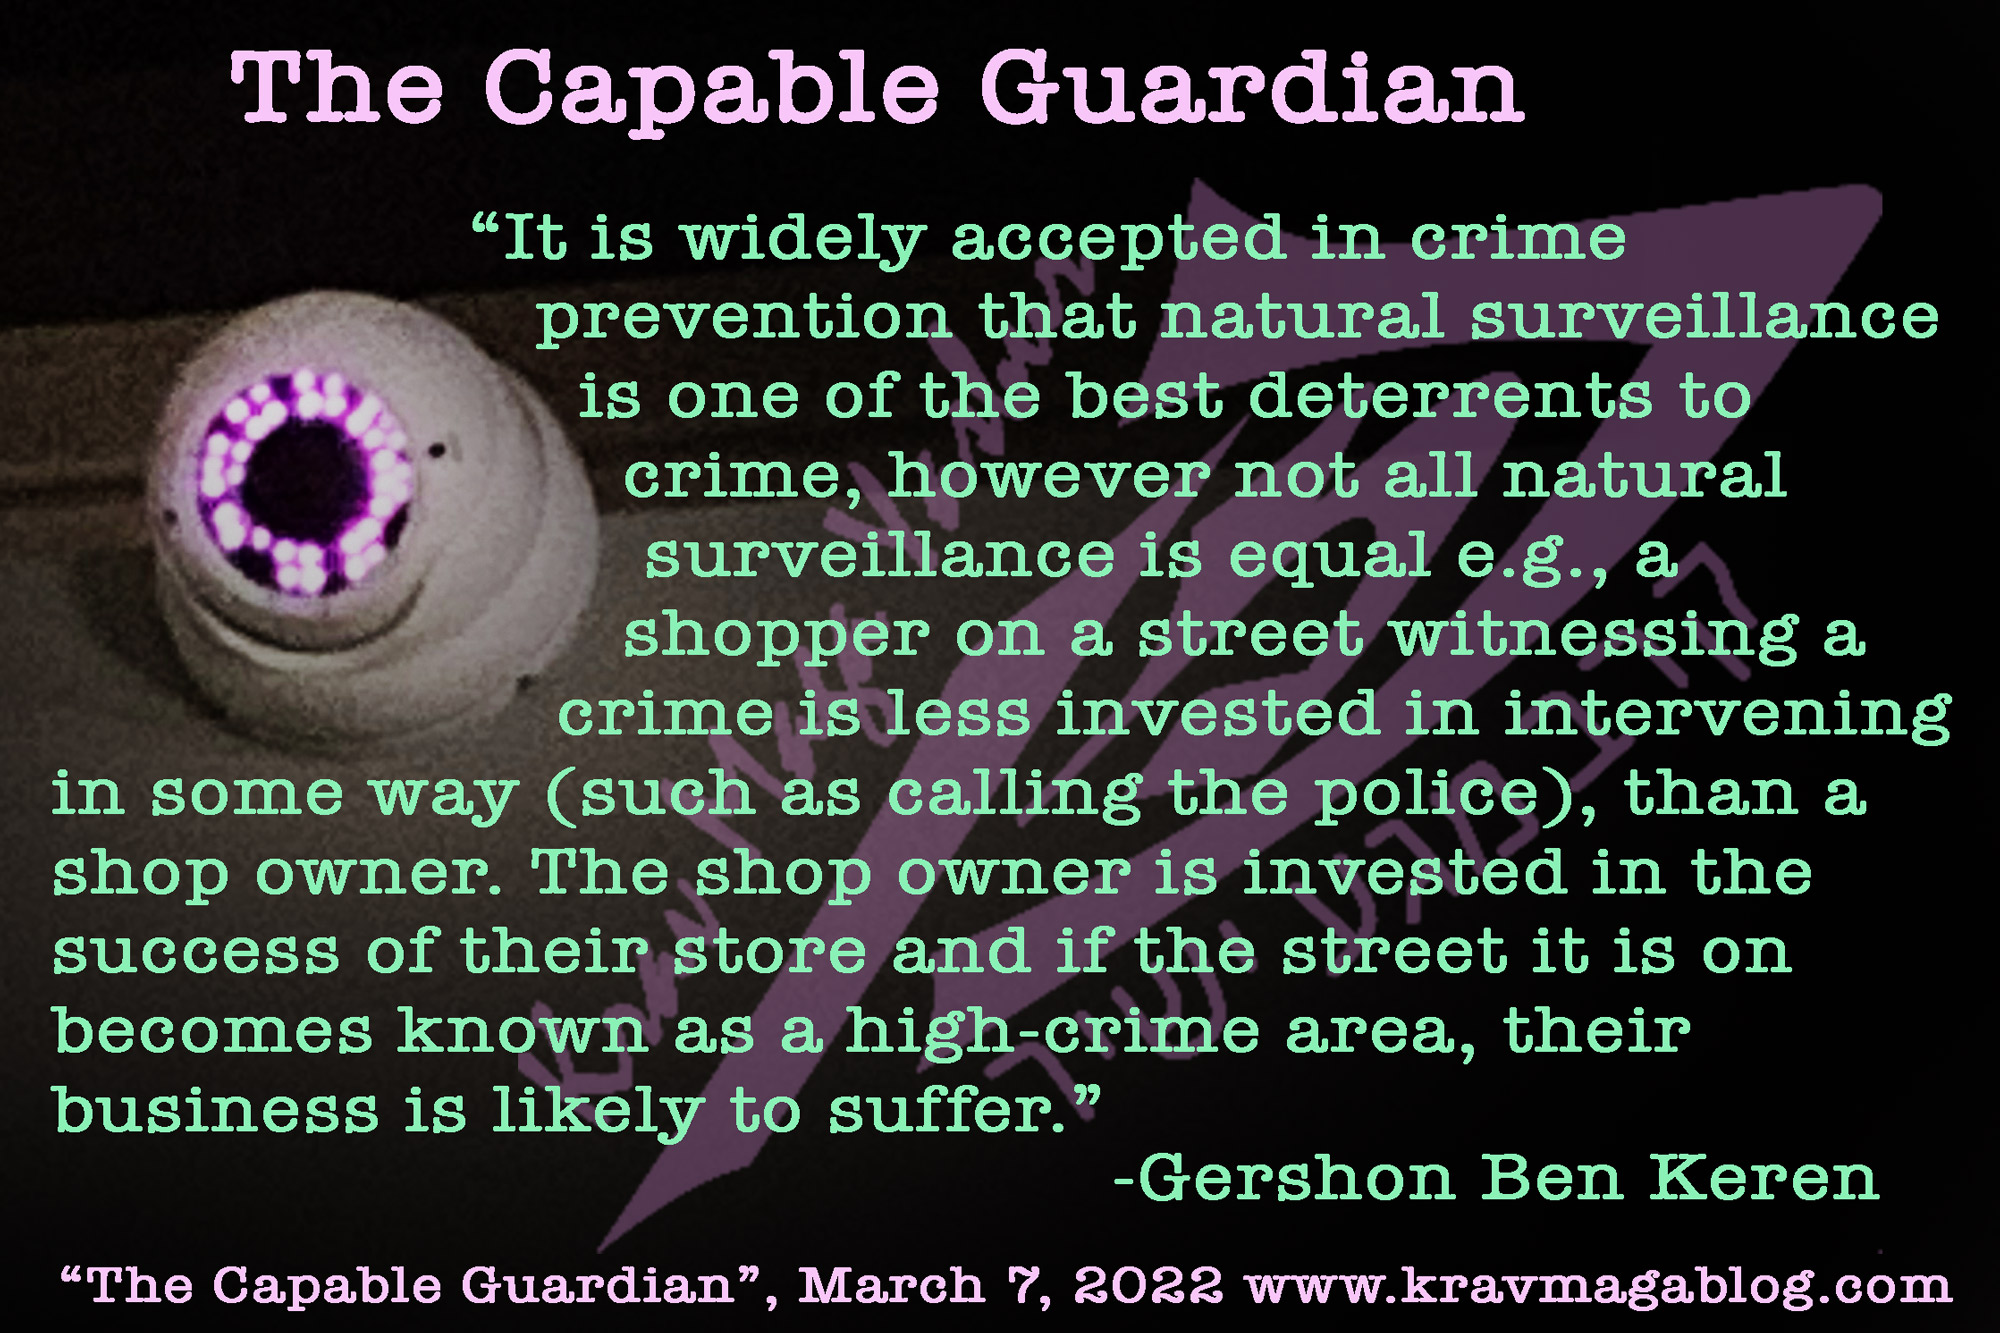 Blog About The Capable Guardian